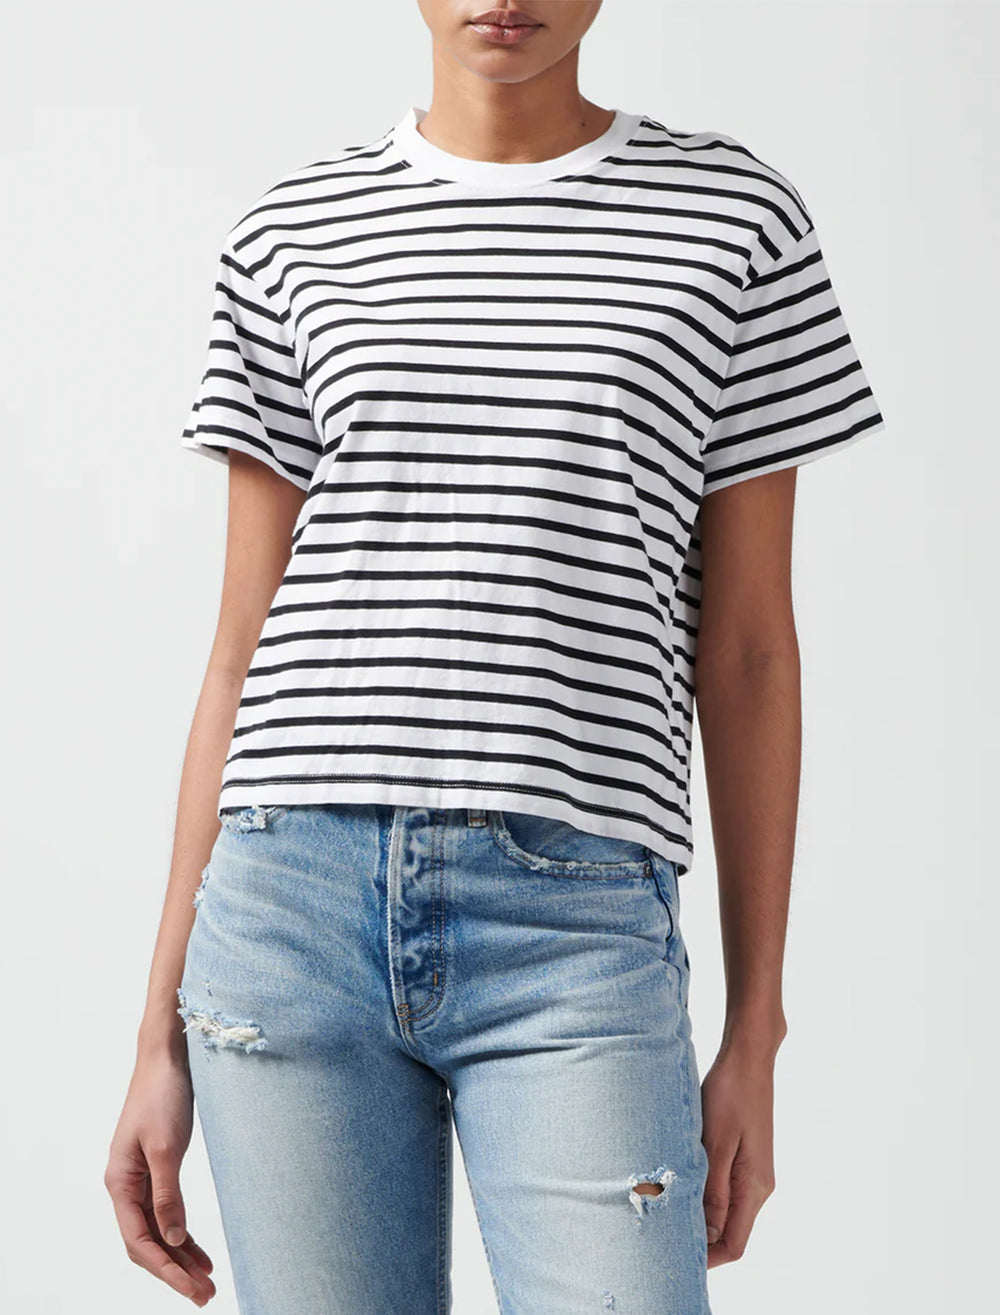 Model wearing ATM's classic jersey short sleeve stripe boy tee in black and white.